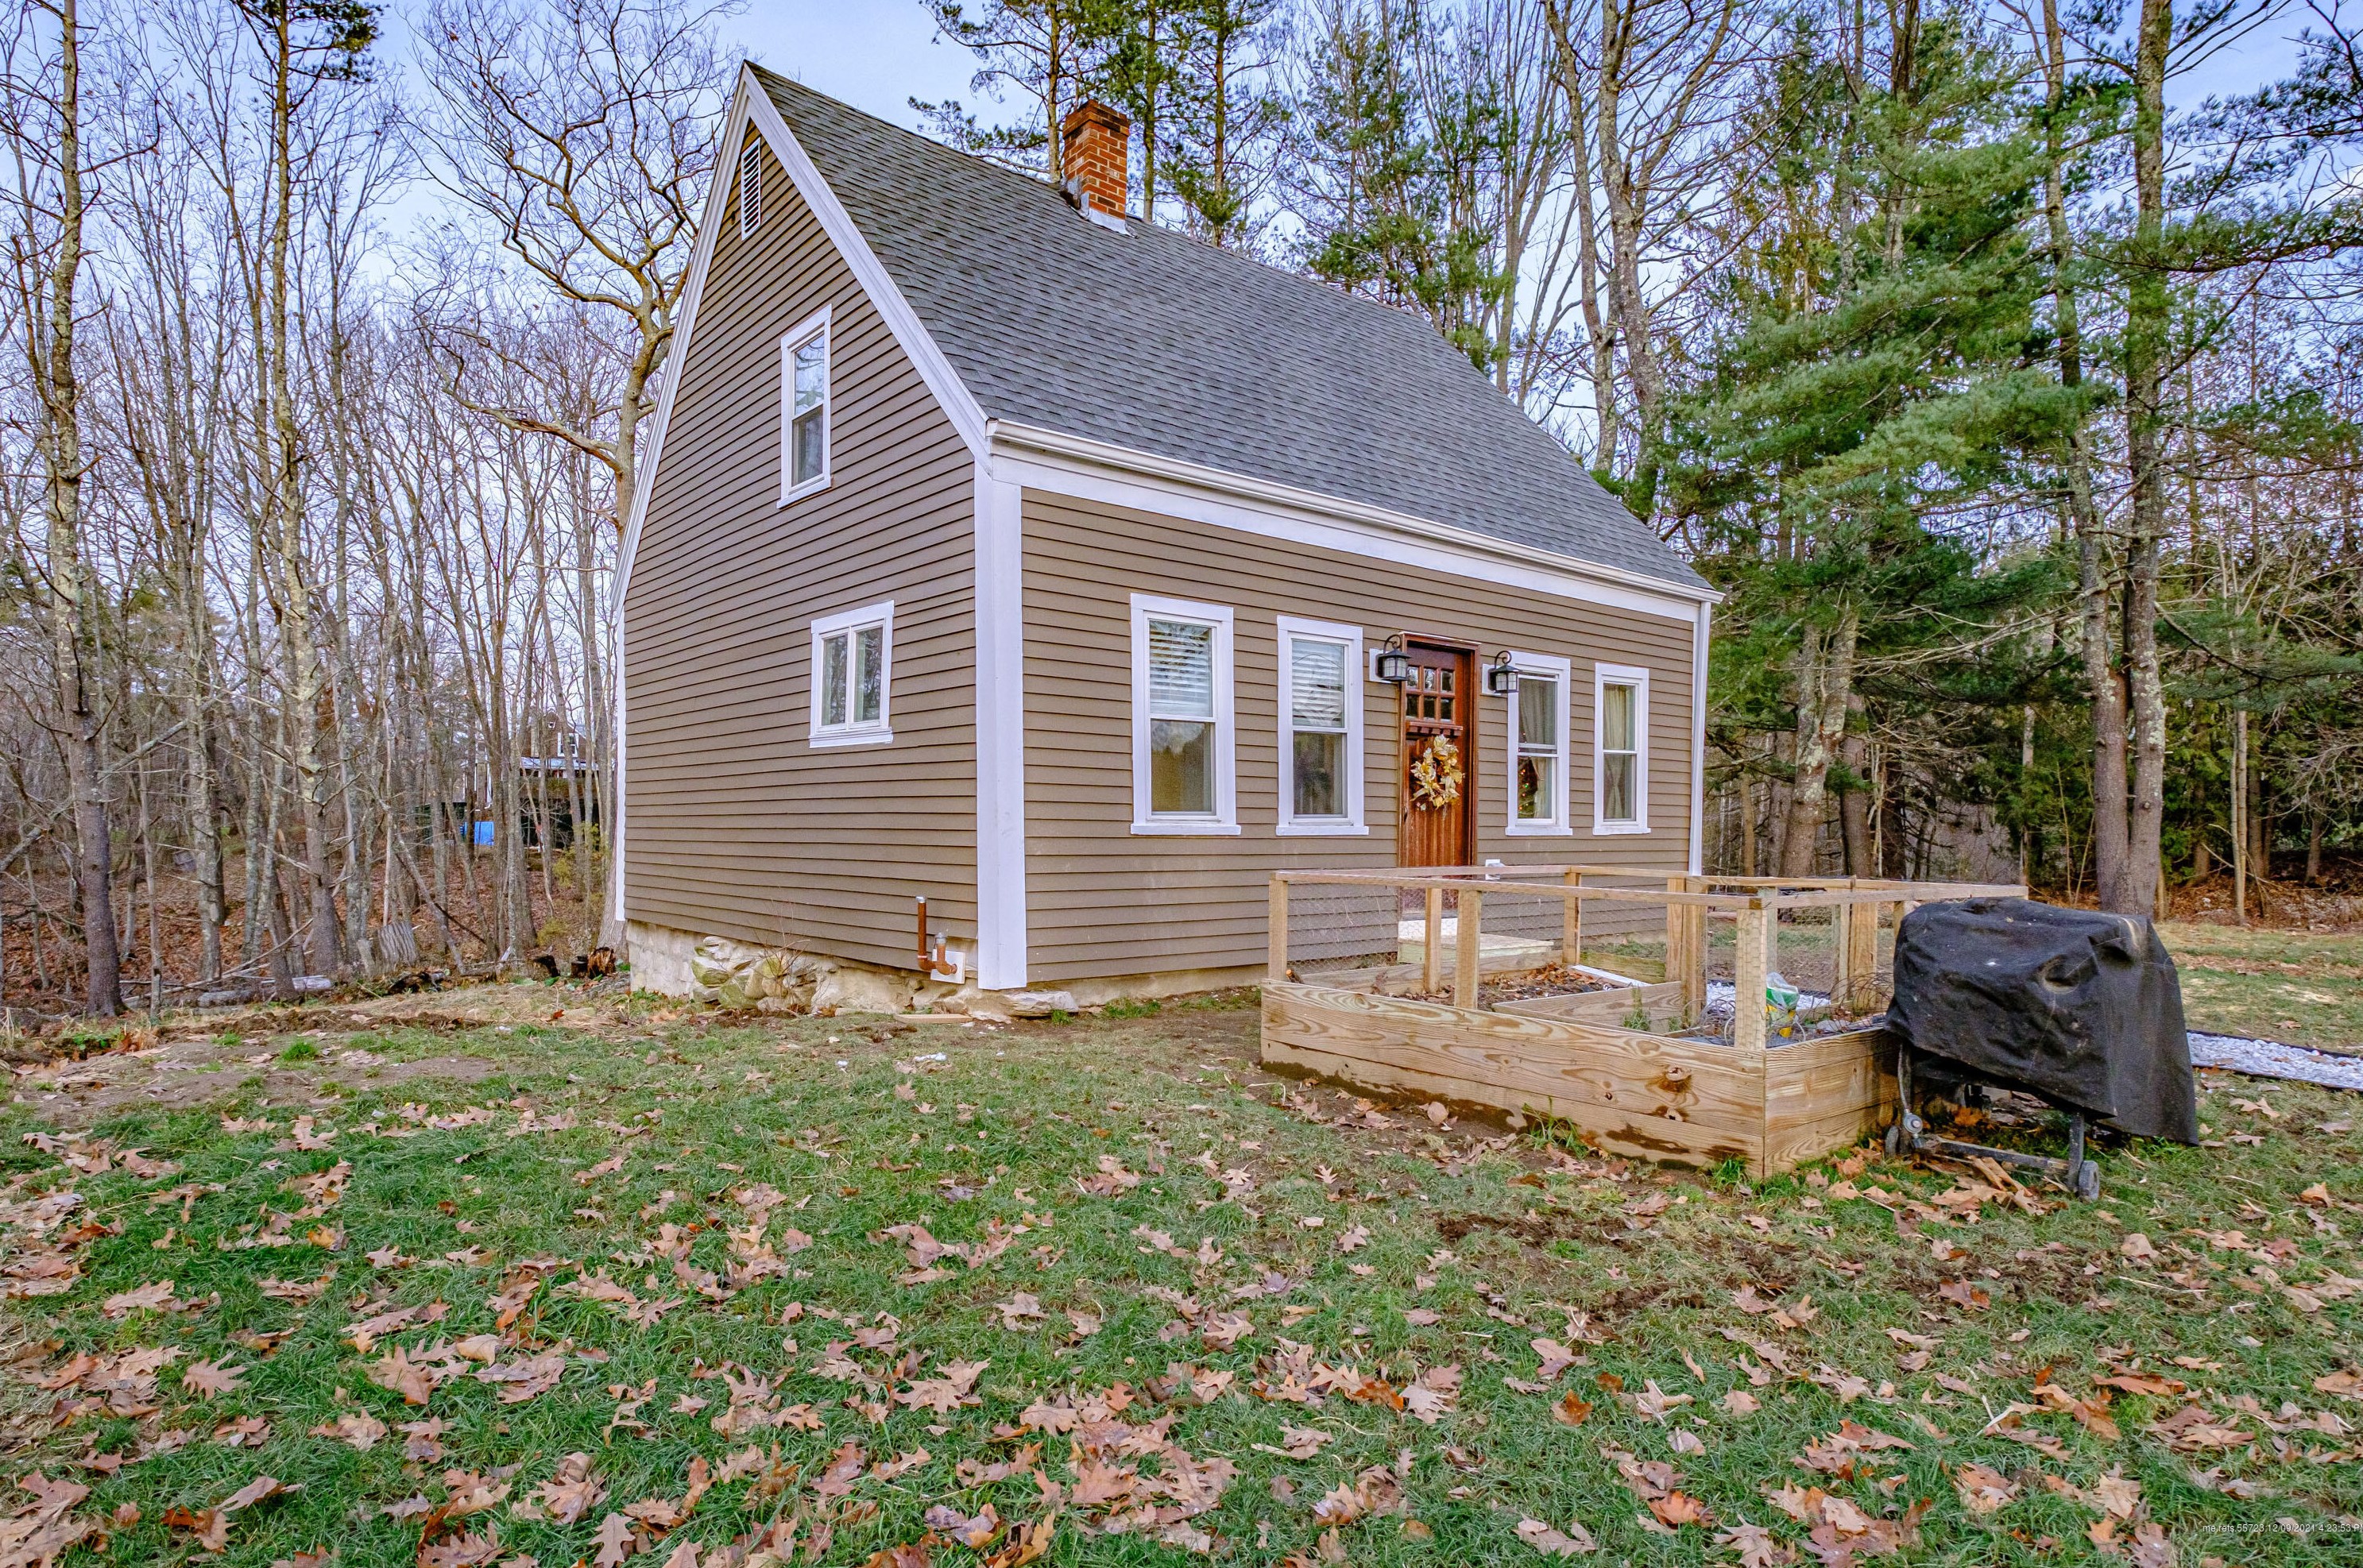 469 Middle Rd, Dresden, ME 04342-3635